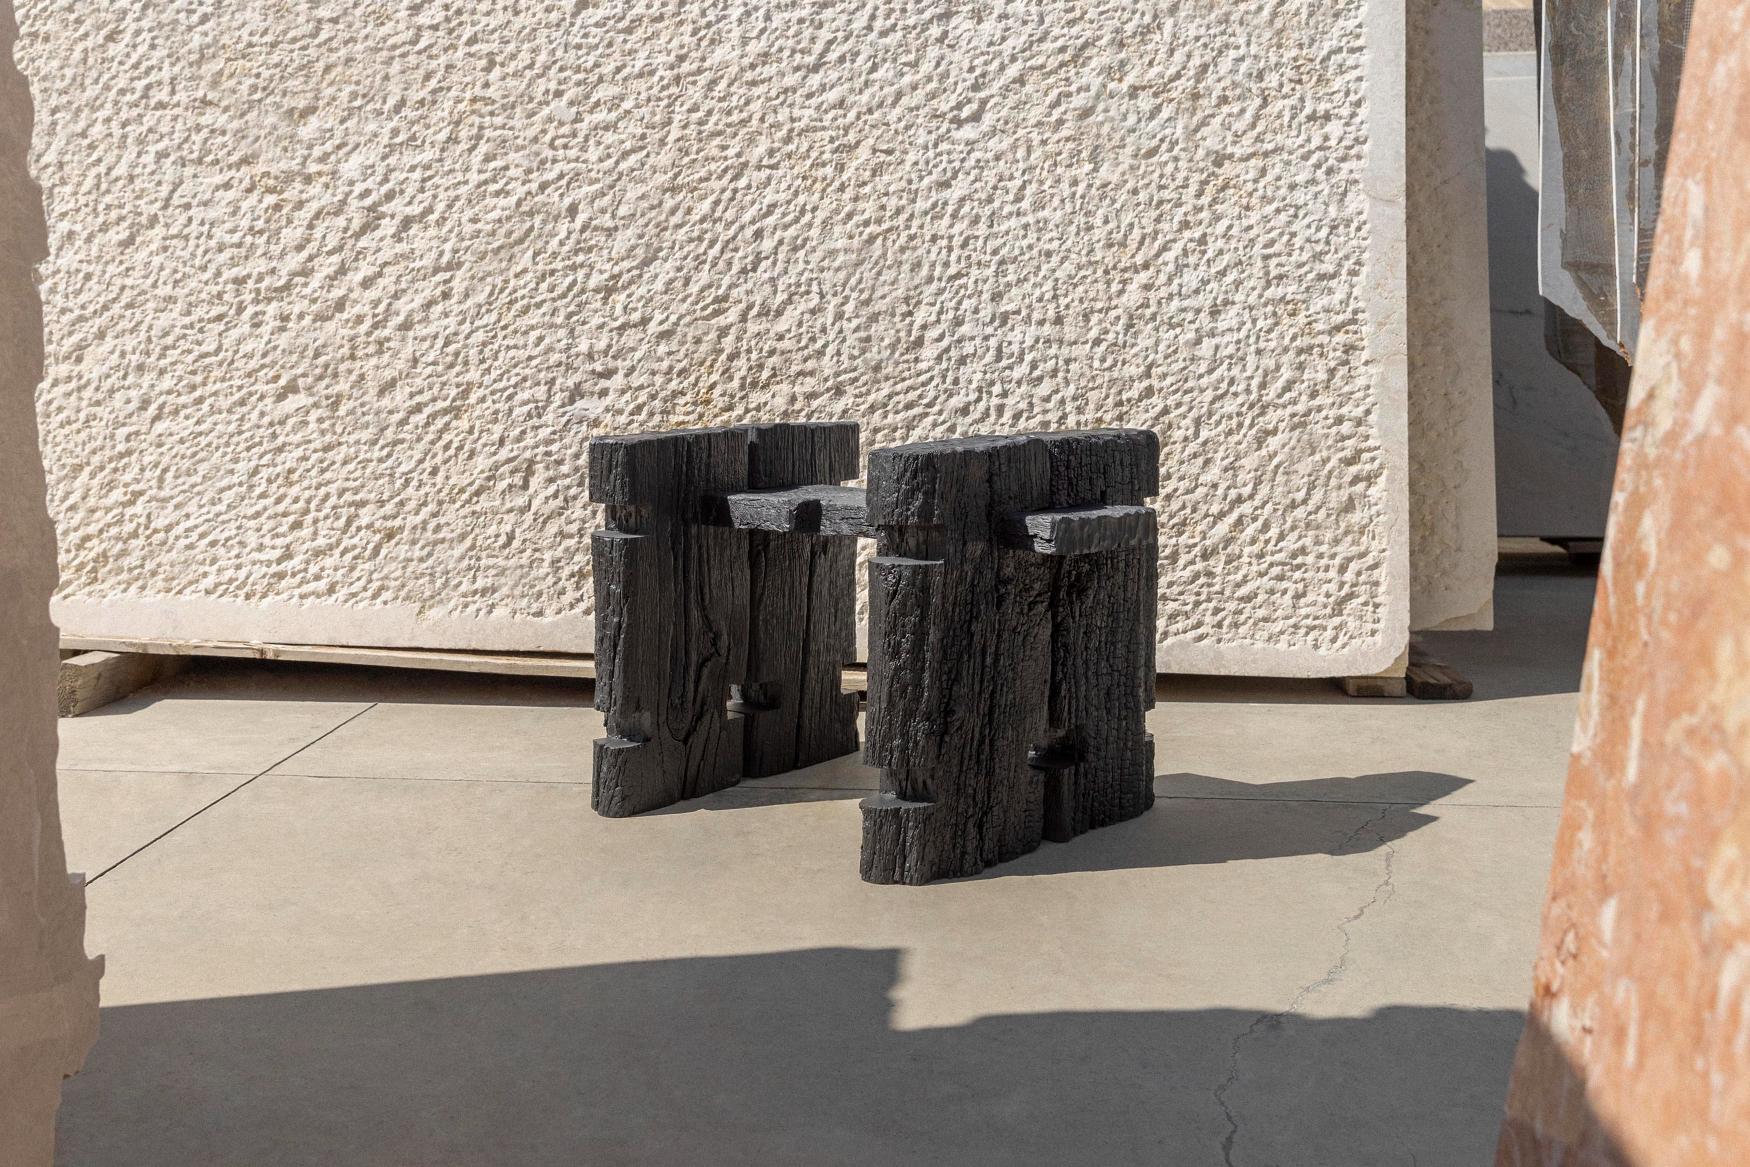 Element Black Bulk Stool by Nana Zaalishvili
Dimensions: W 85 x D 50 x H 55 cm
Materials: Textured and Painted Wood

‘Element’, which combines furniture of different functions, was created under the influence of the Georgian Oda house and the